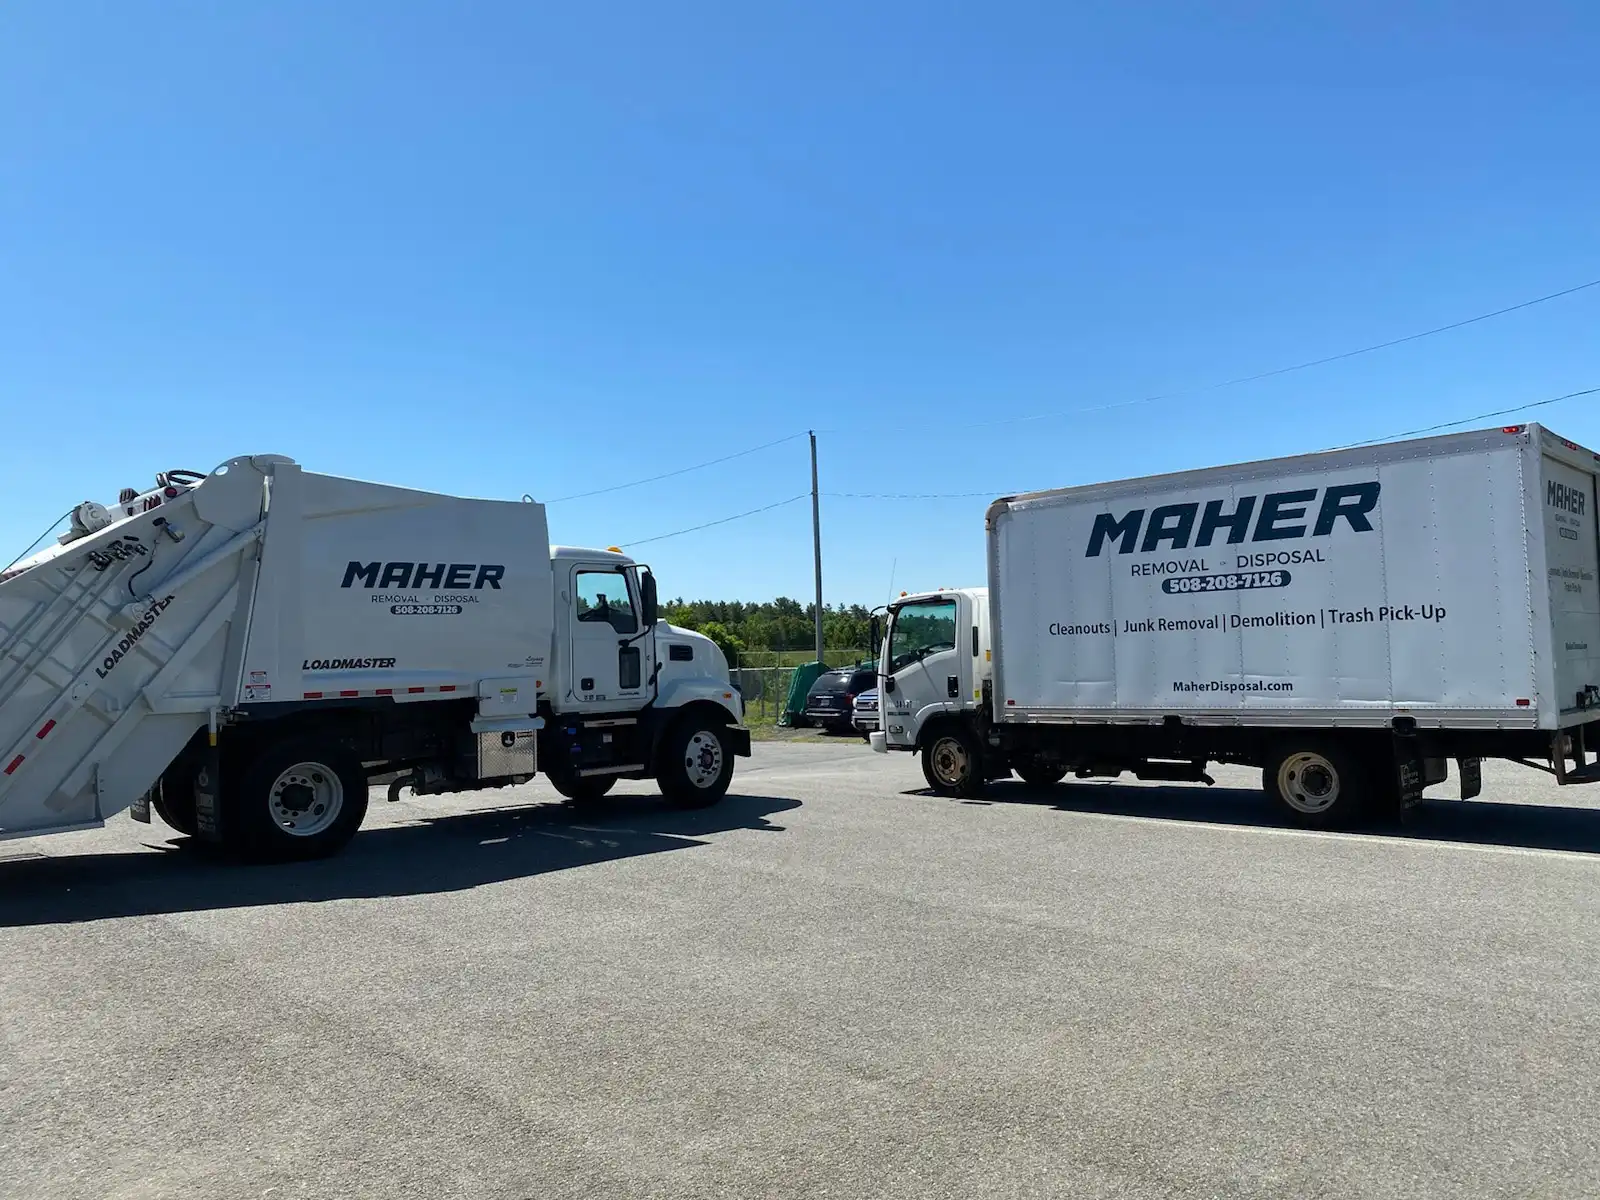 Maher Removal & Disposal is a Trash Pickup & Junk Removal company in South Orleans, MA